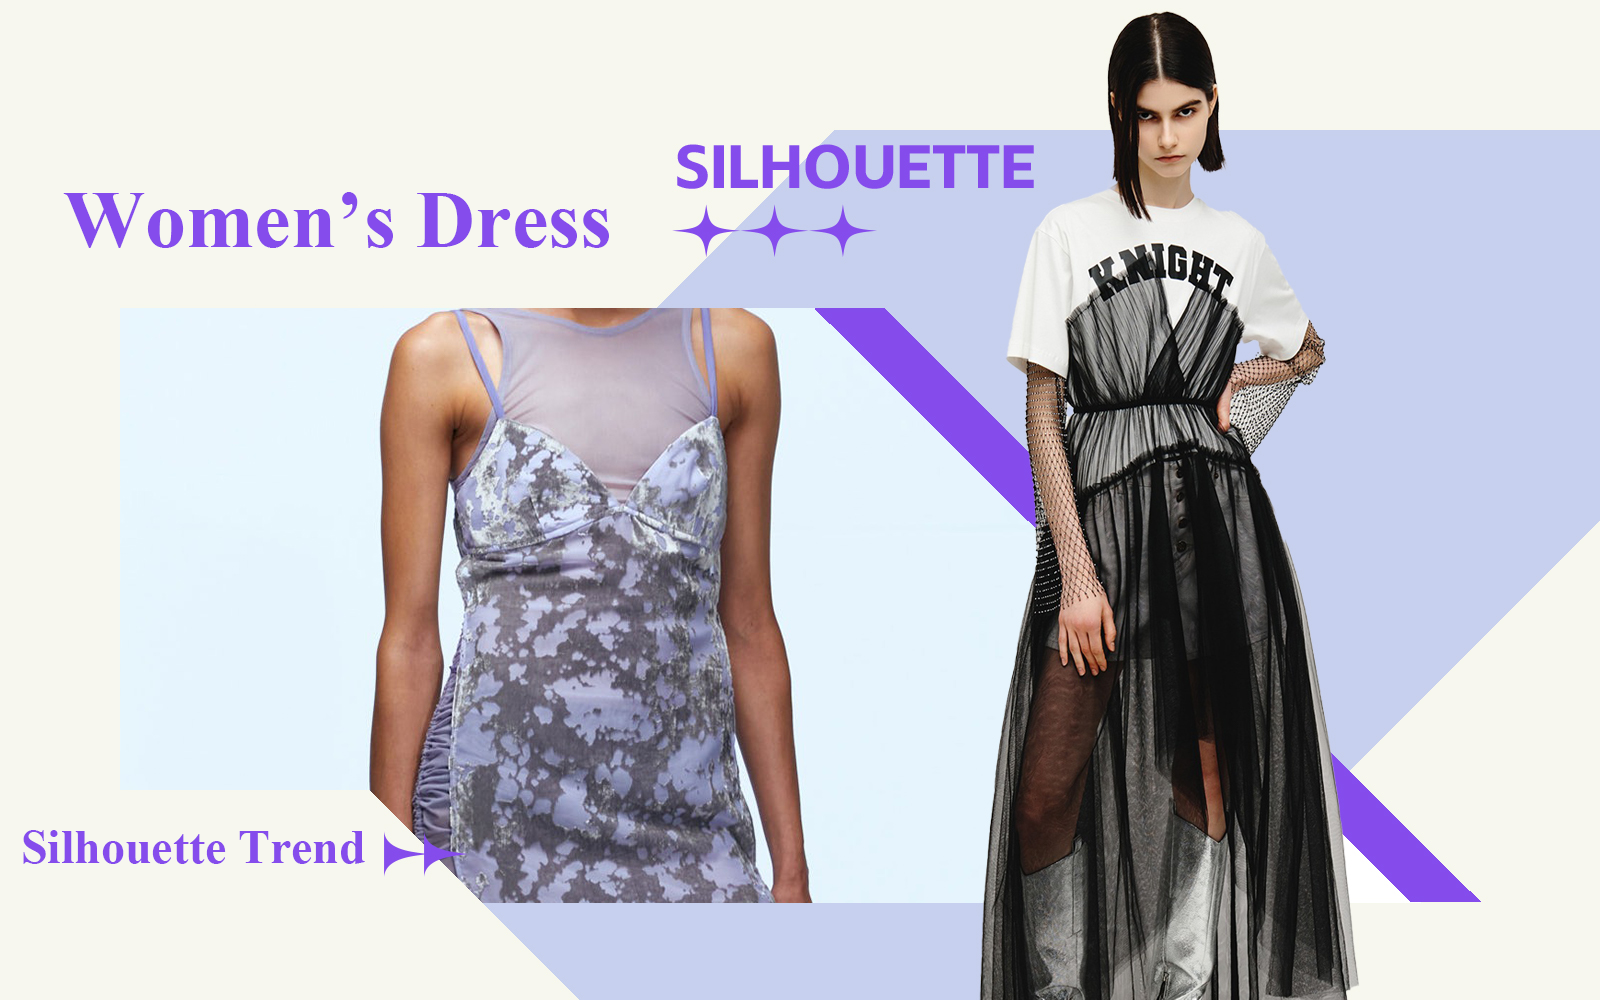 Cool Girl -- The Silhouette Trend for Women's Dress